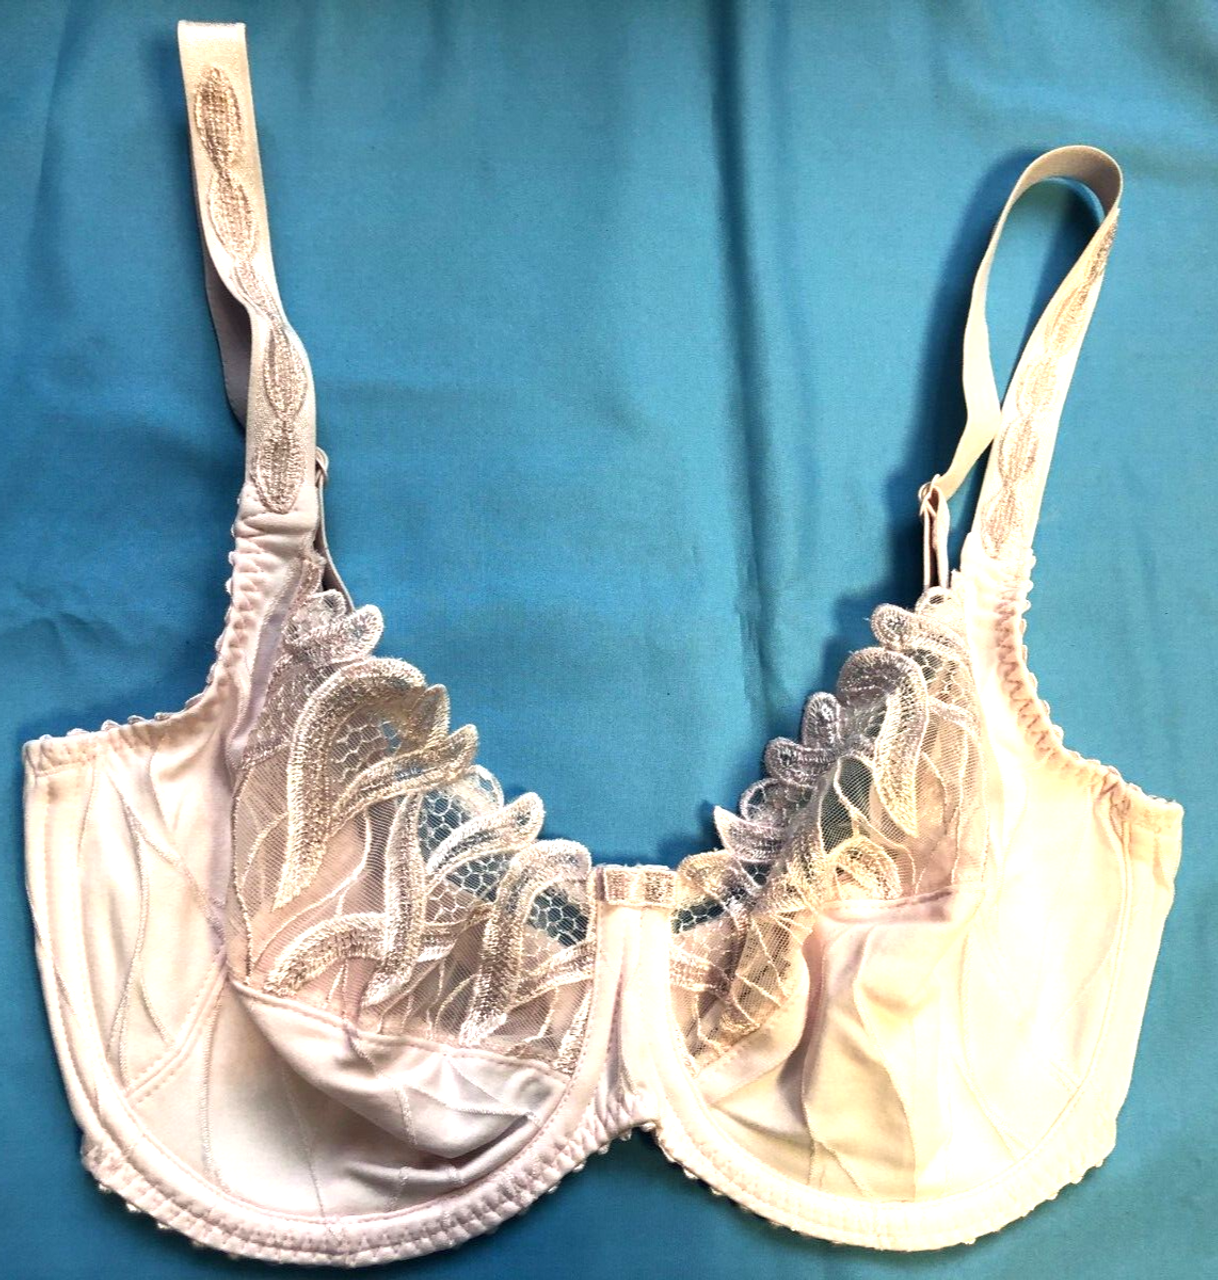 Louisa Bracq Bra 32E Pale Pink Full Cup Underwired Non Padded 47701 BNWT